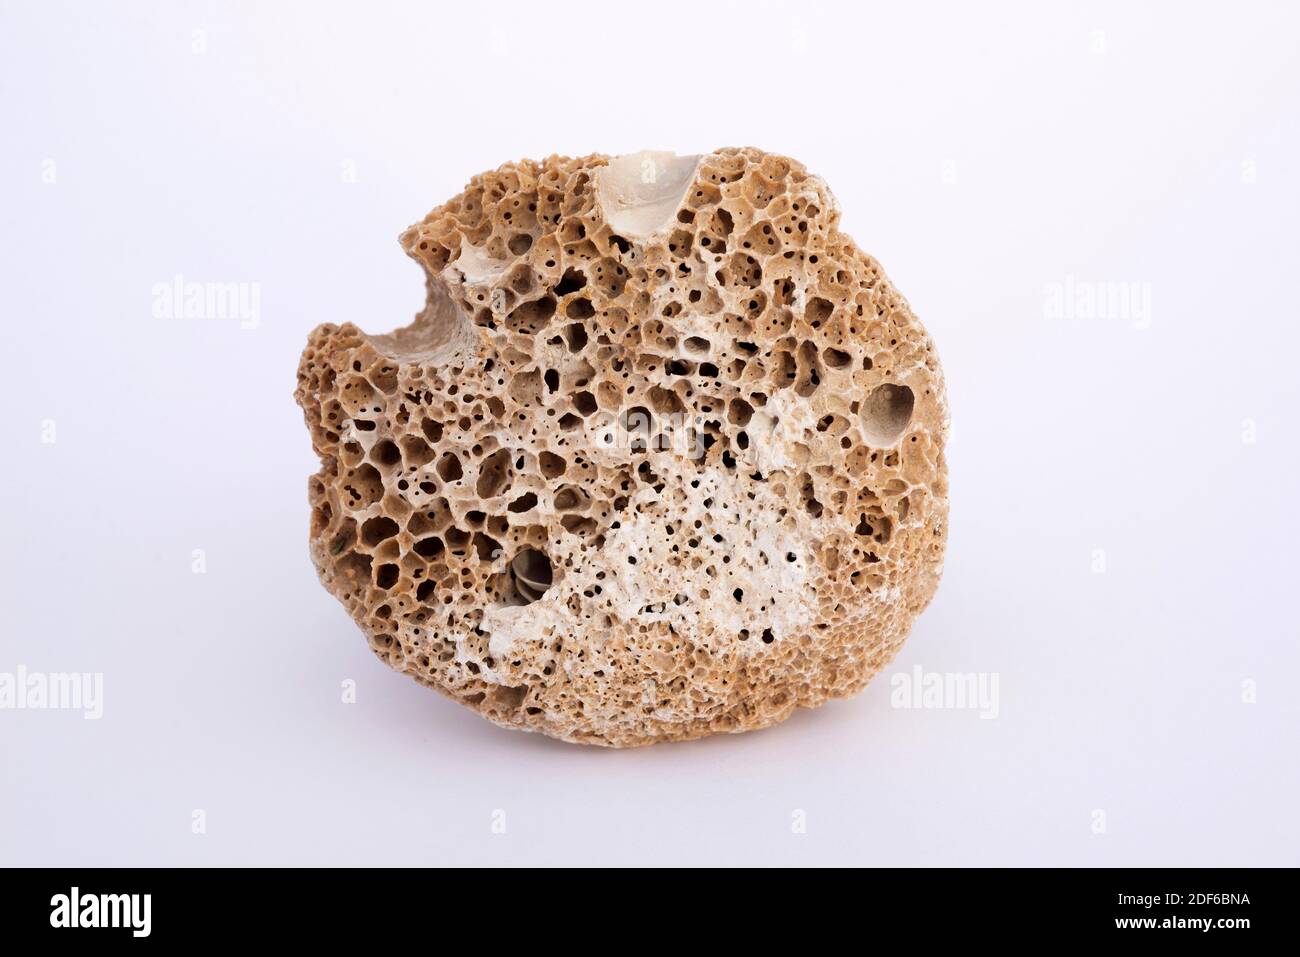 Bioerosion of a calcareous rock for bivalve mollusks. Bioerosion is a chemical process caused by living organisms. The sample comes from Portitxol, Stock Photo